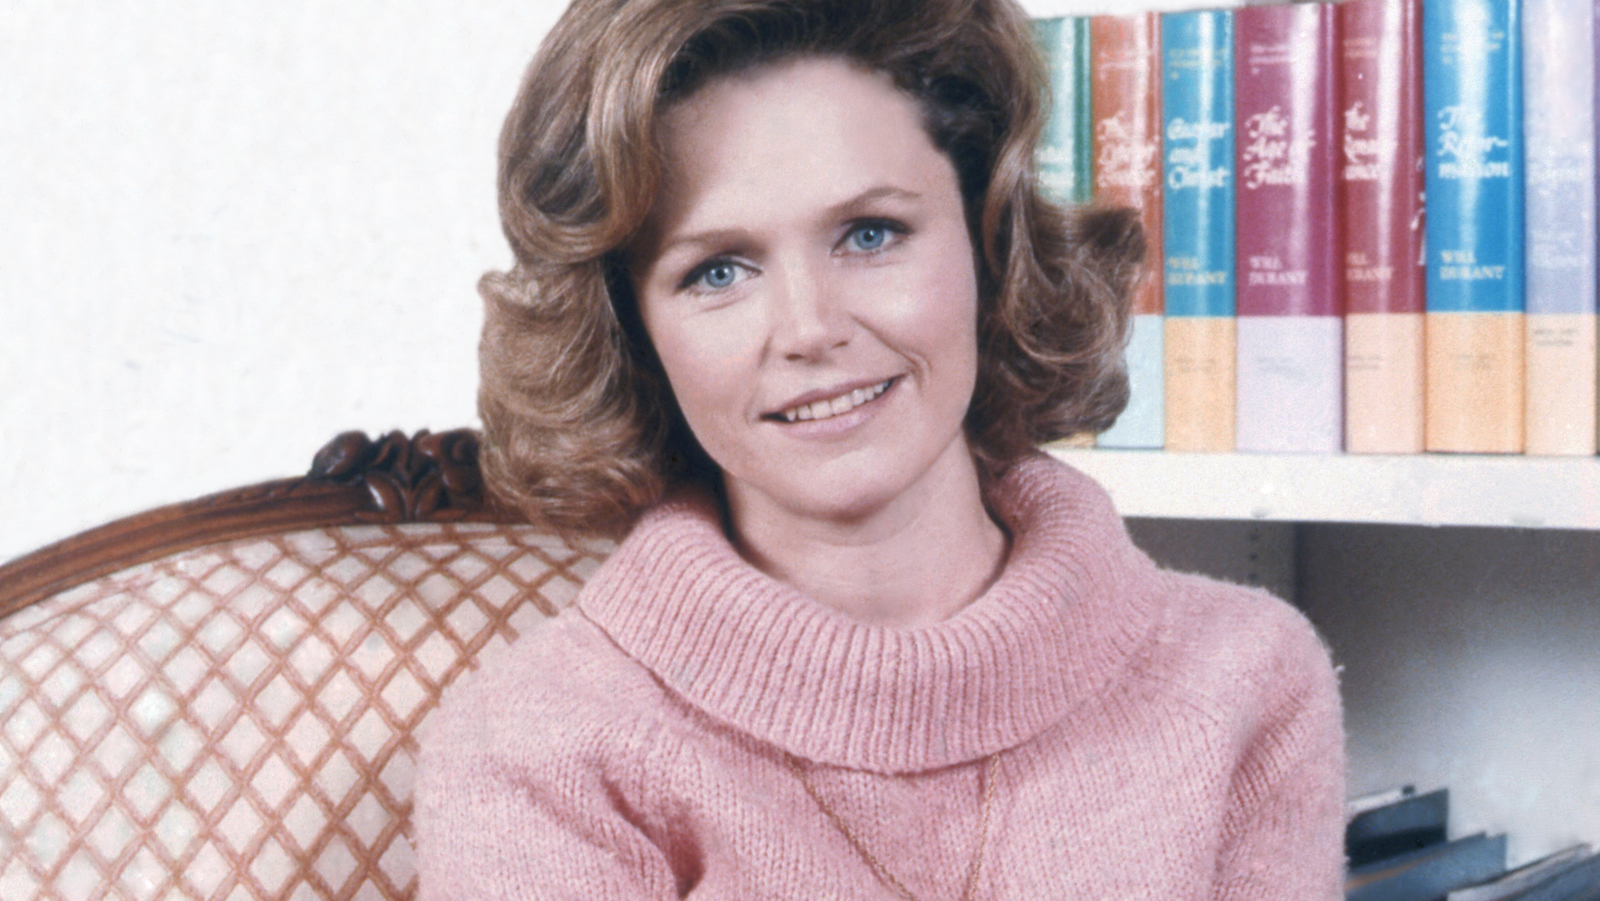 Images of lee remick